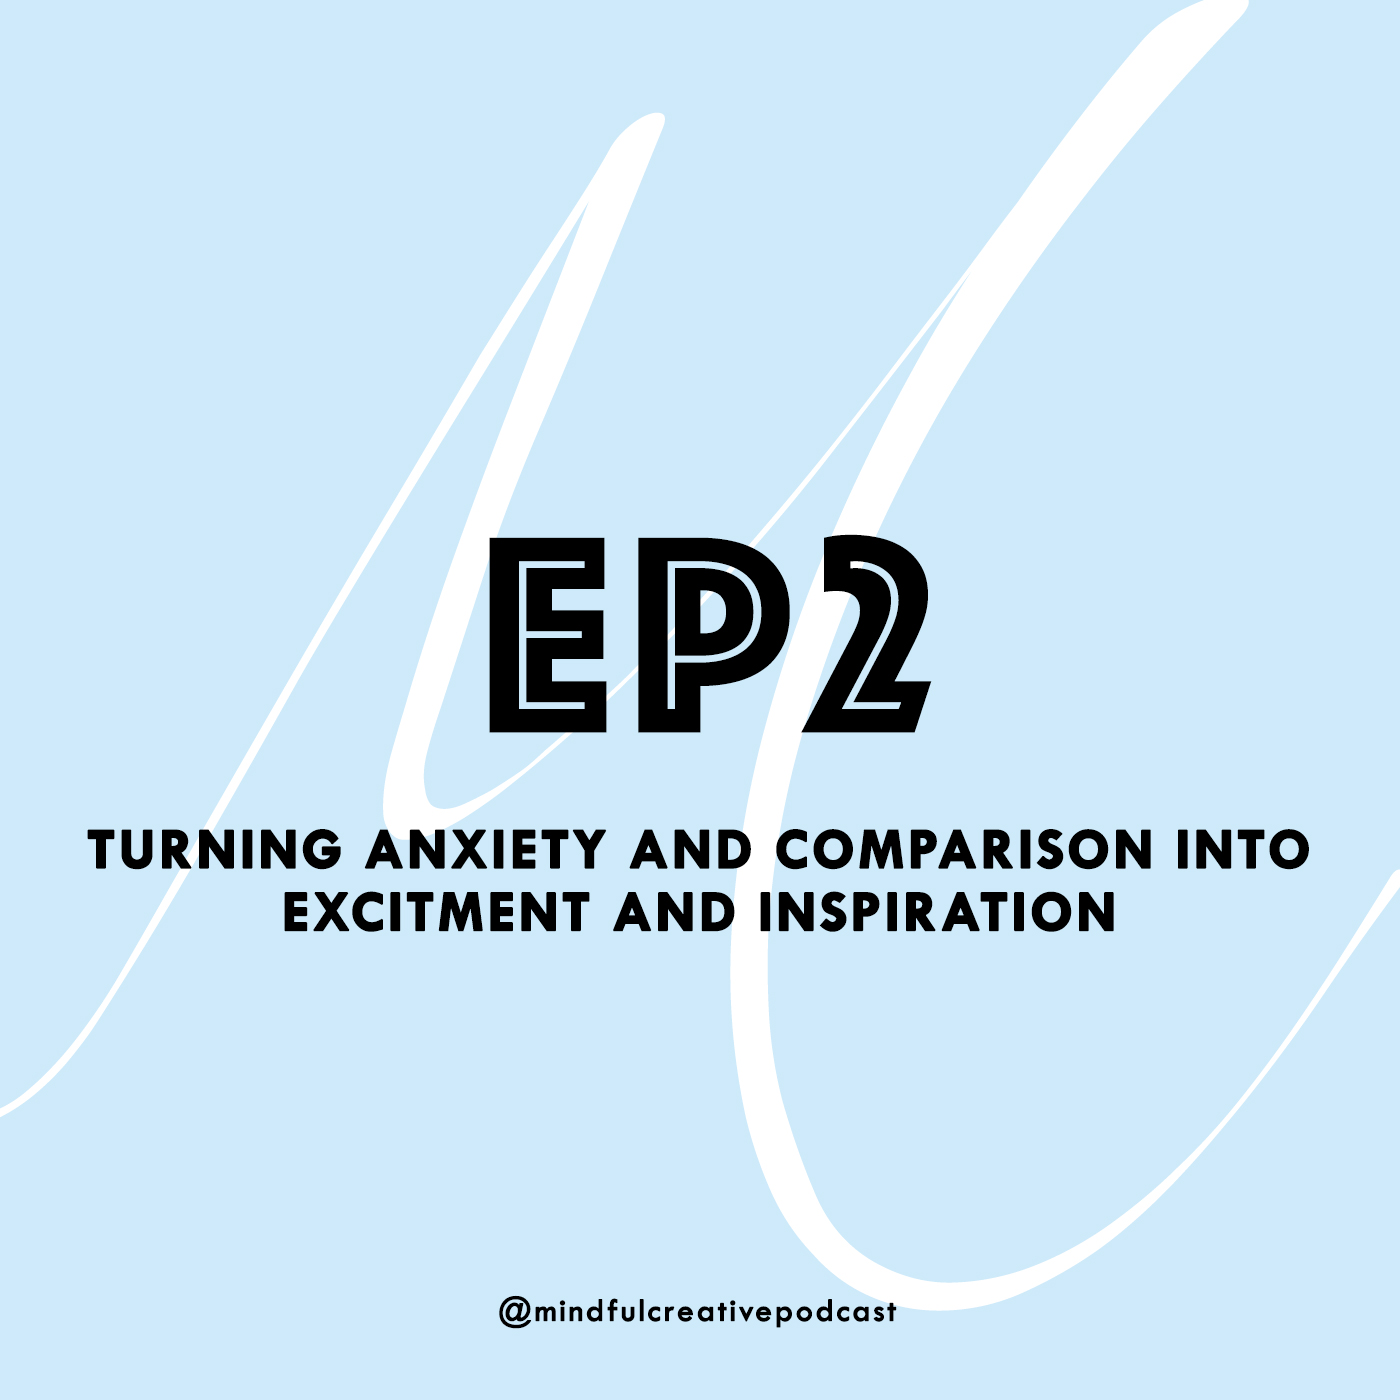 Episode 2 - Turning Anxiety and Comparison into Excitement and Inspiration.